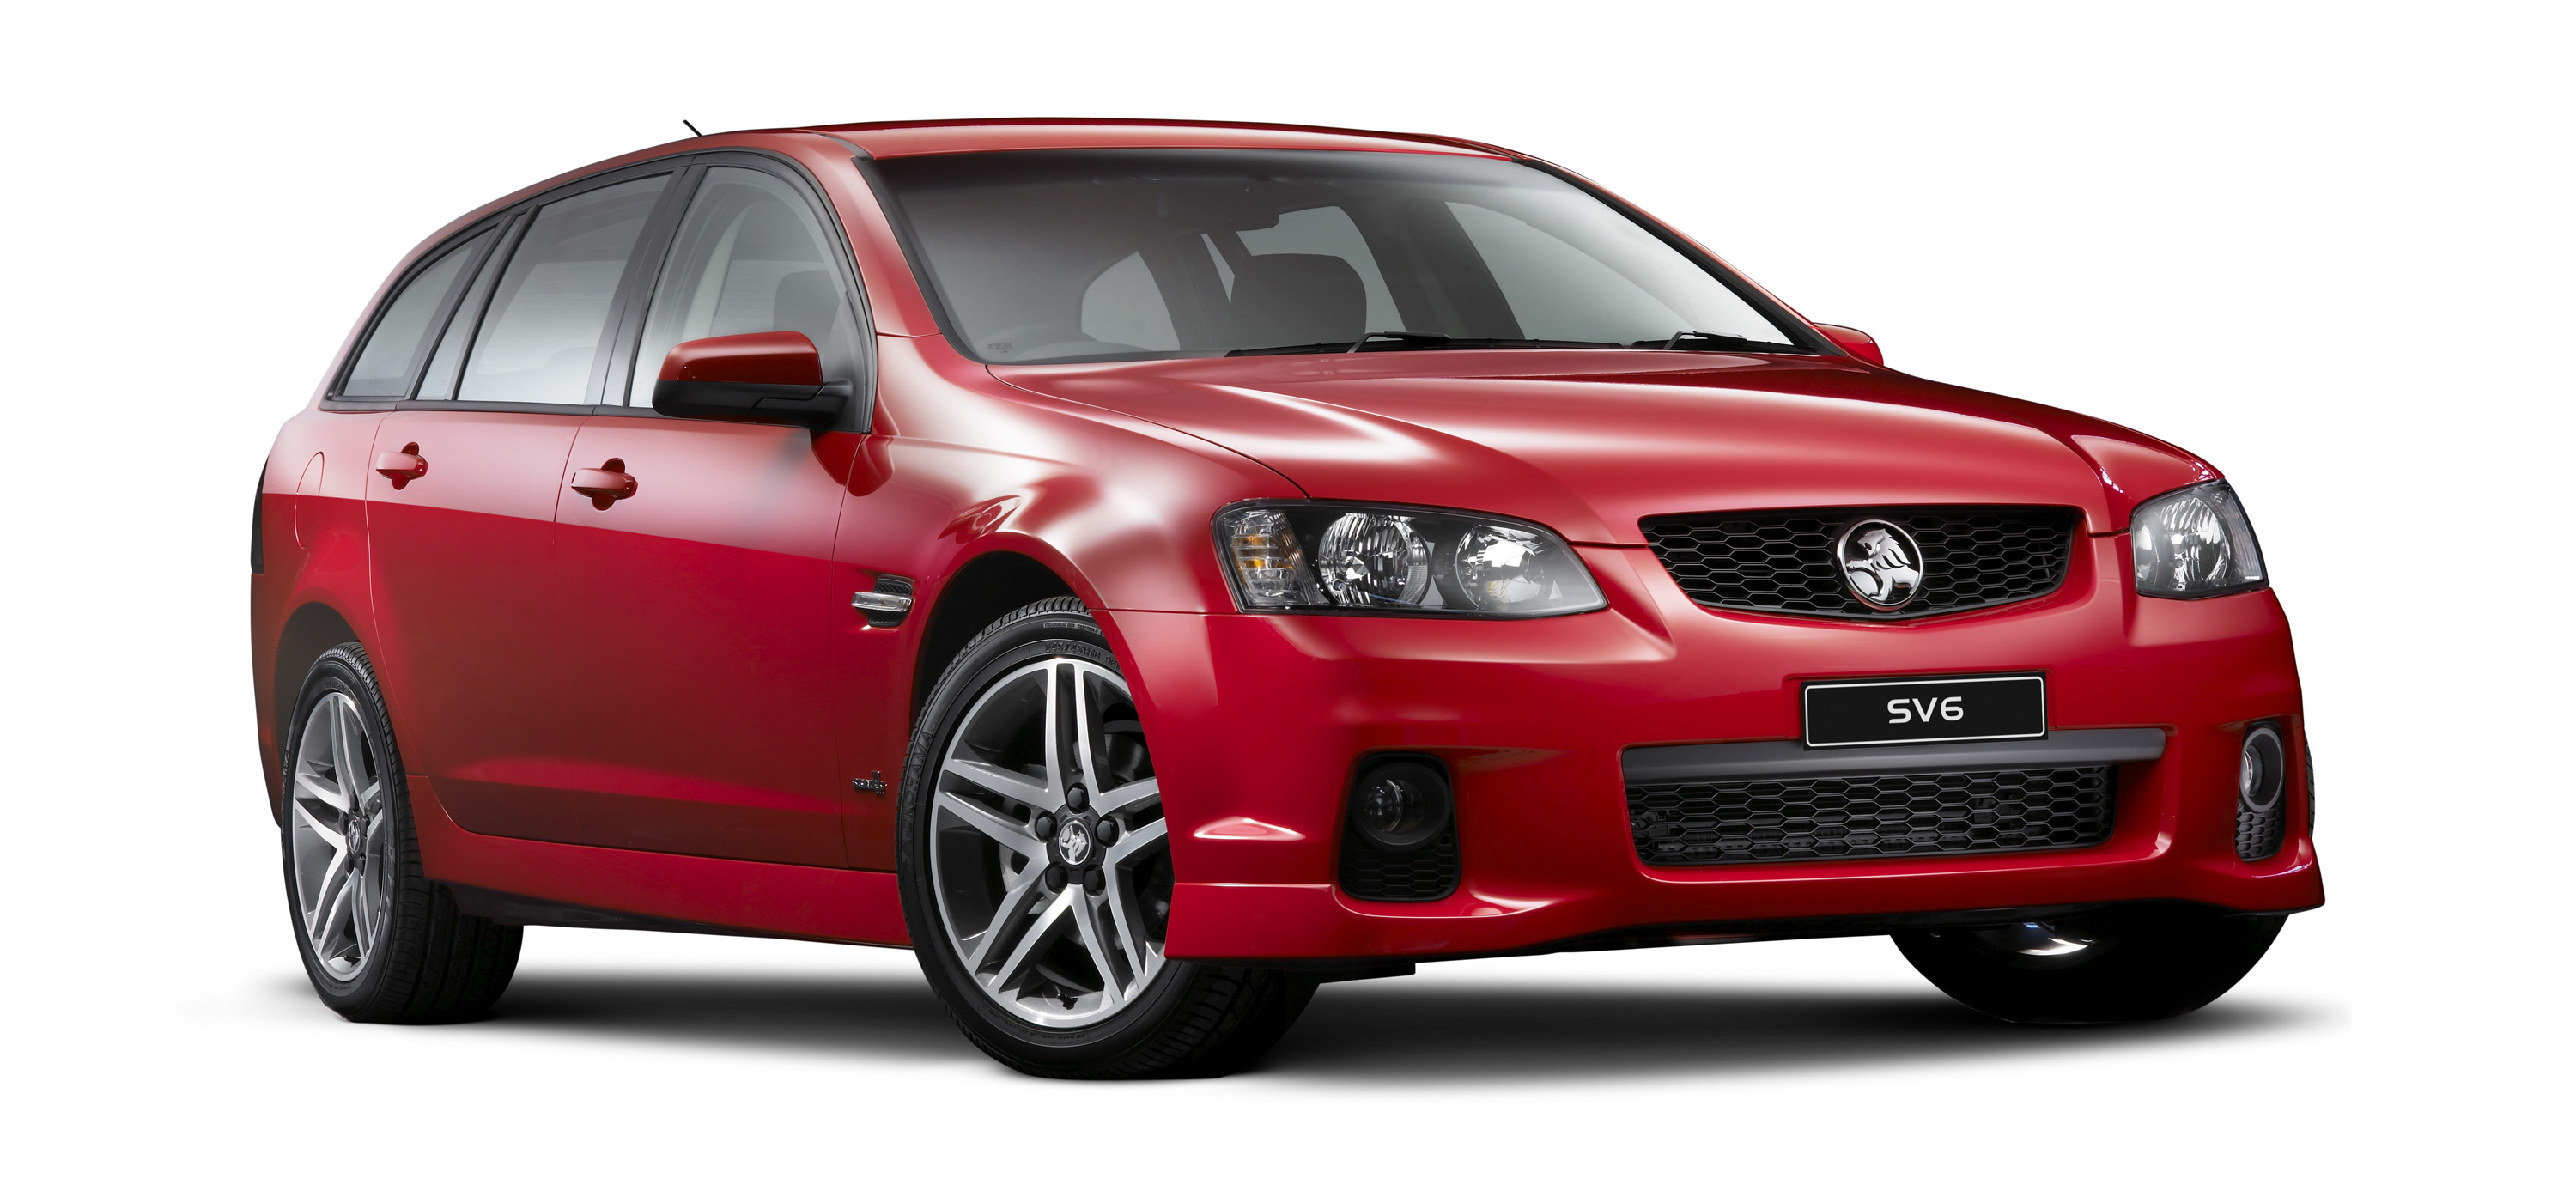 Holden Commodore SV6 Series II. Posted on Friday, September 3,